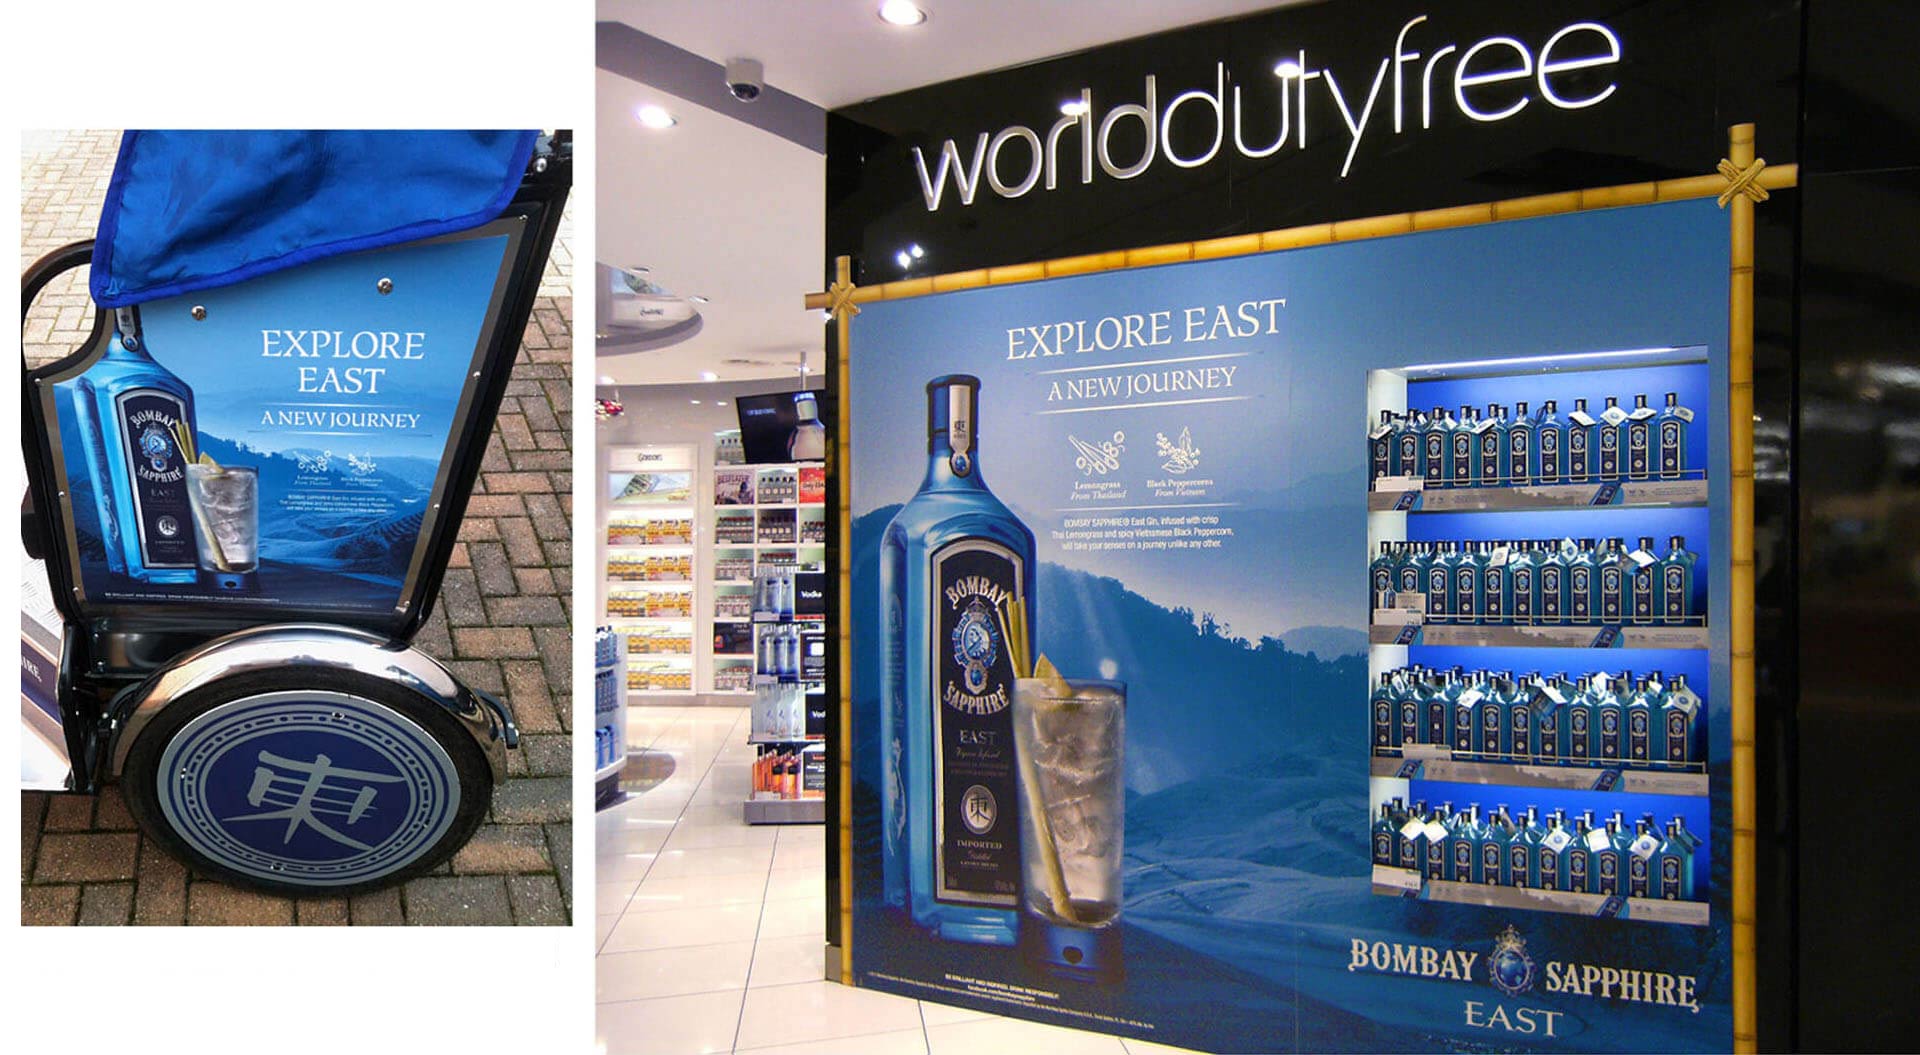 Bombay Sapphire East store branding for World Duty Free Heathrow - Explore East a new journey and tuk tuk design